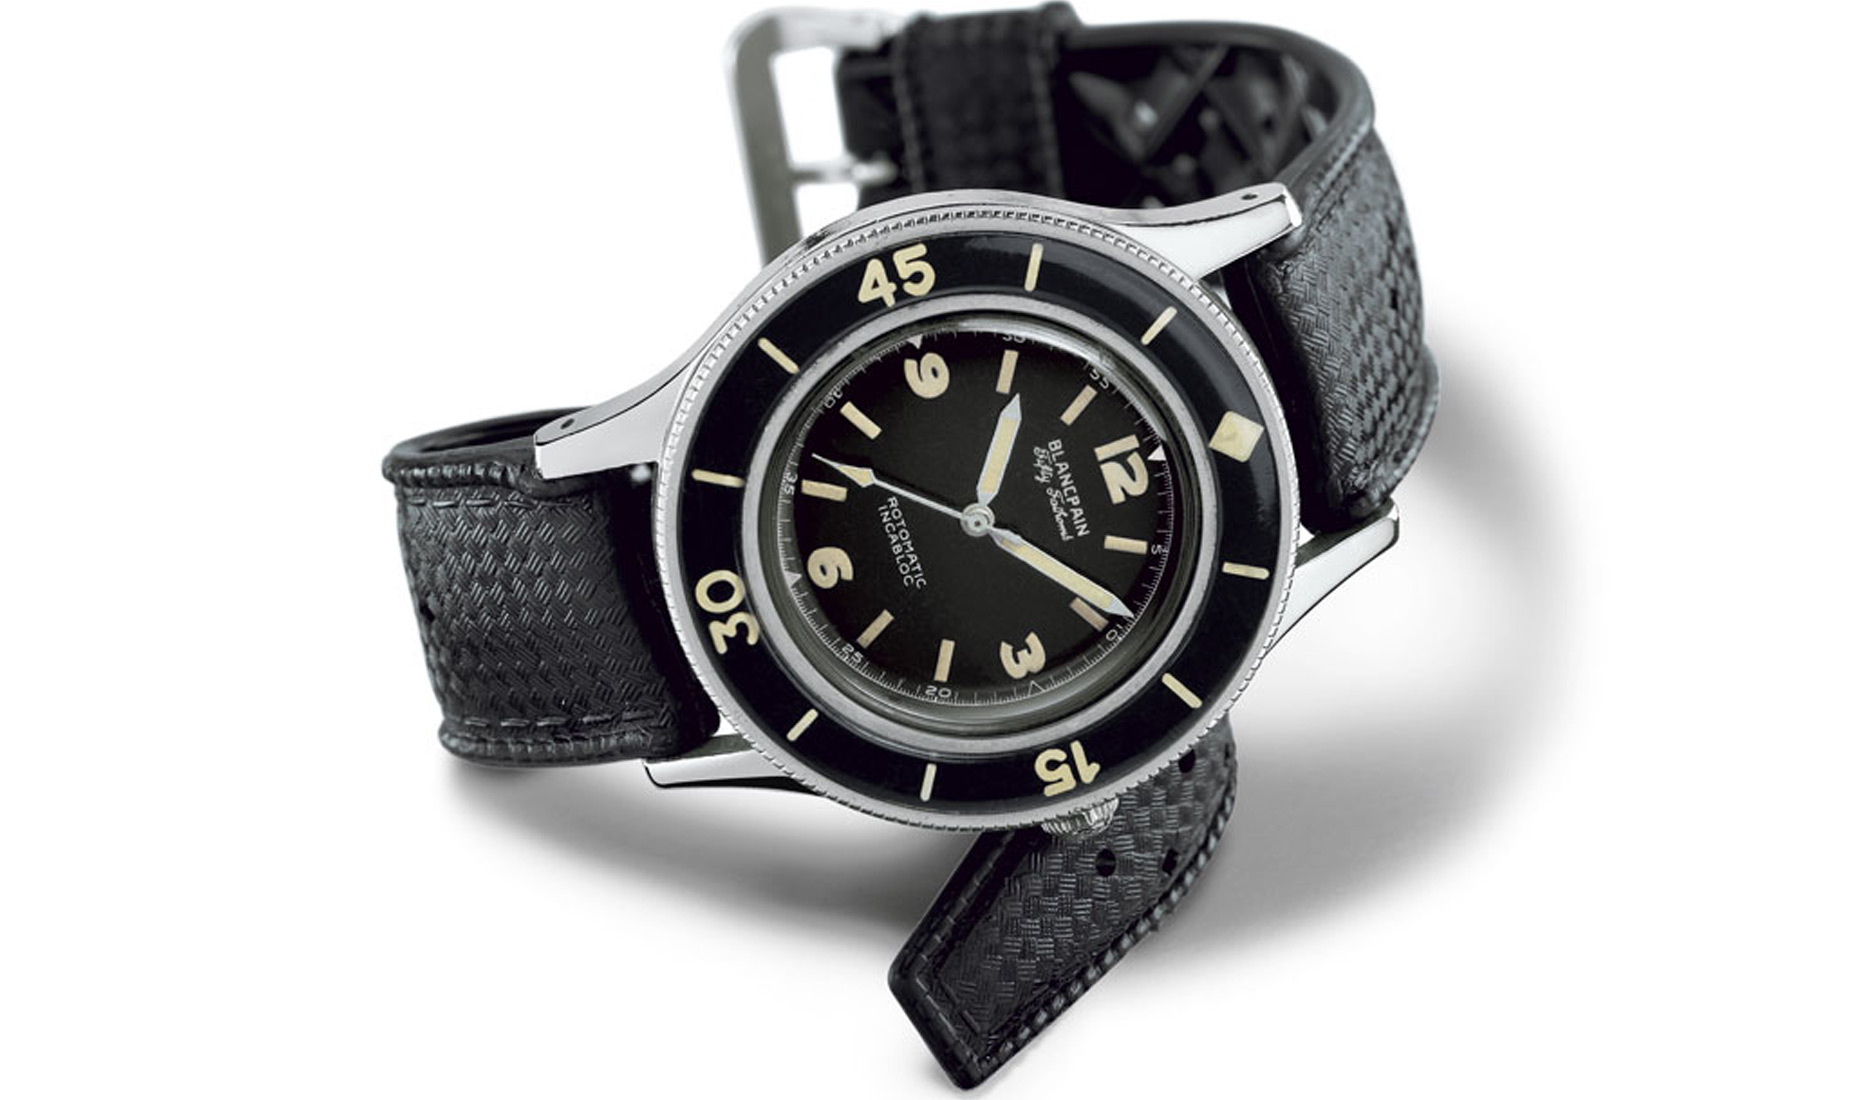 Blancpain Fifty Fathoms from 1953